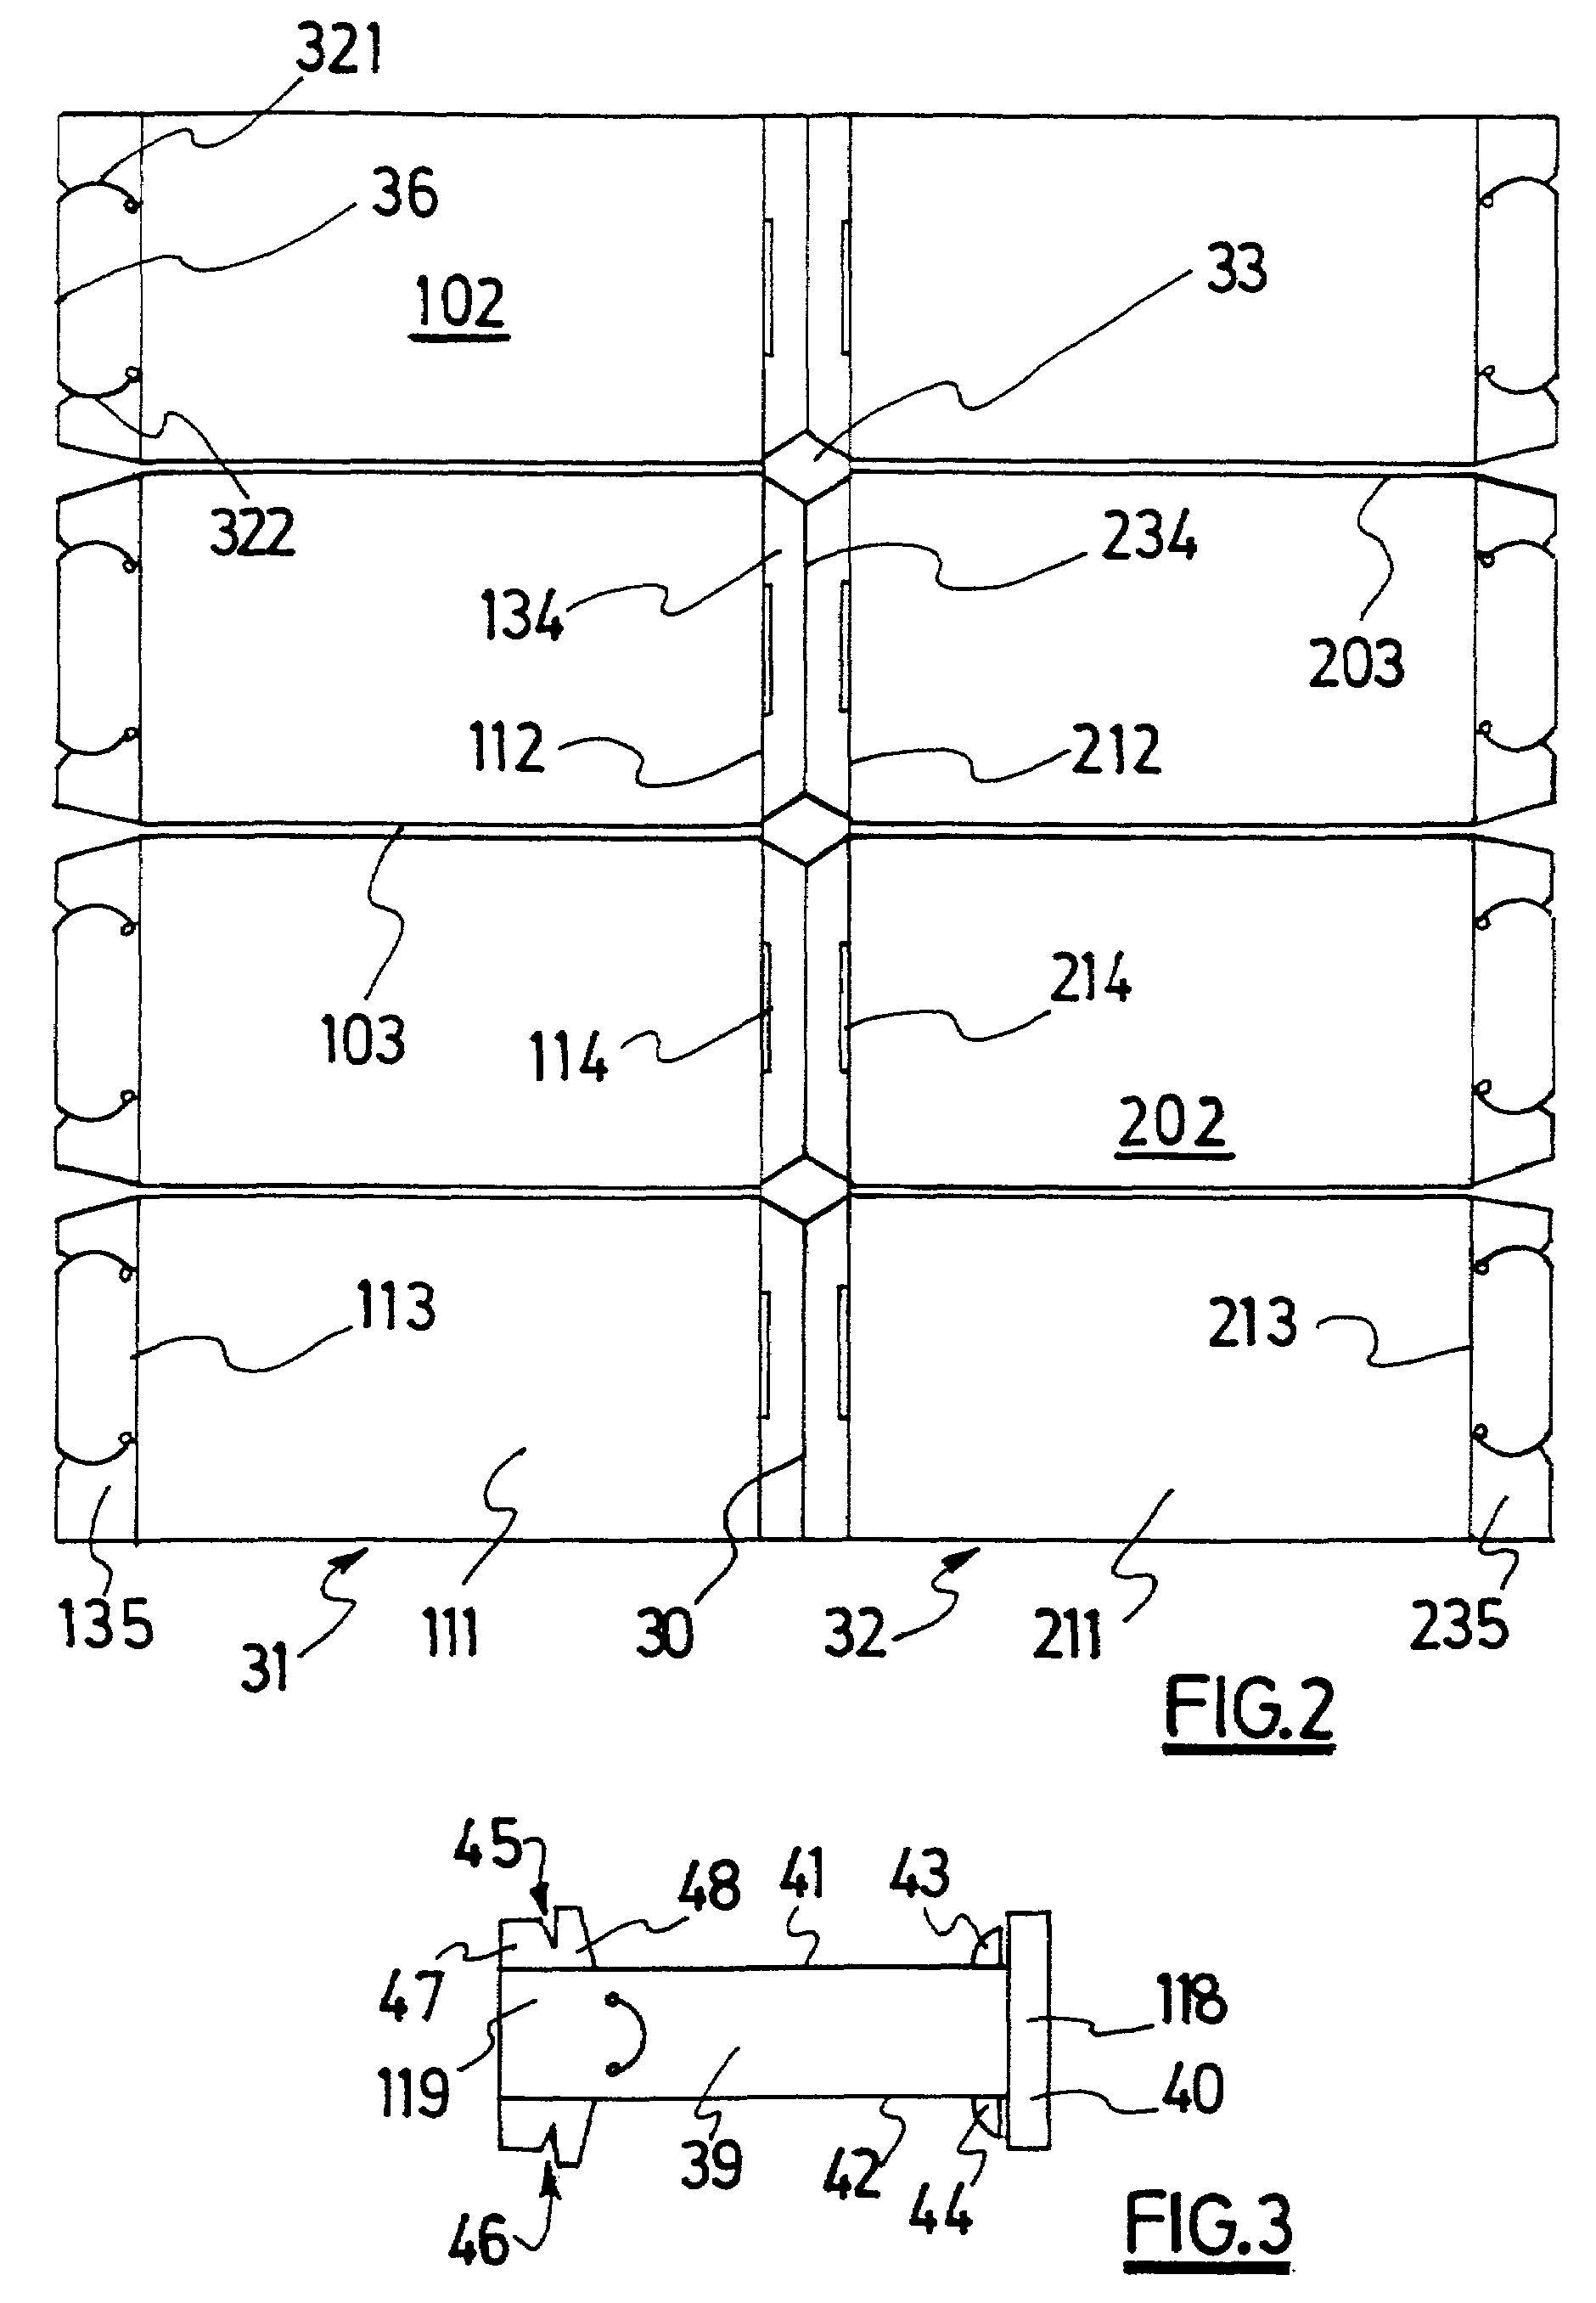 Information display unit support having at least one presentation face